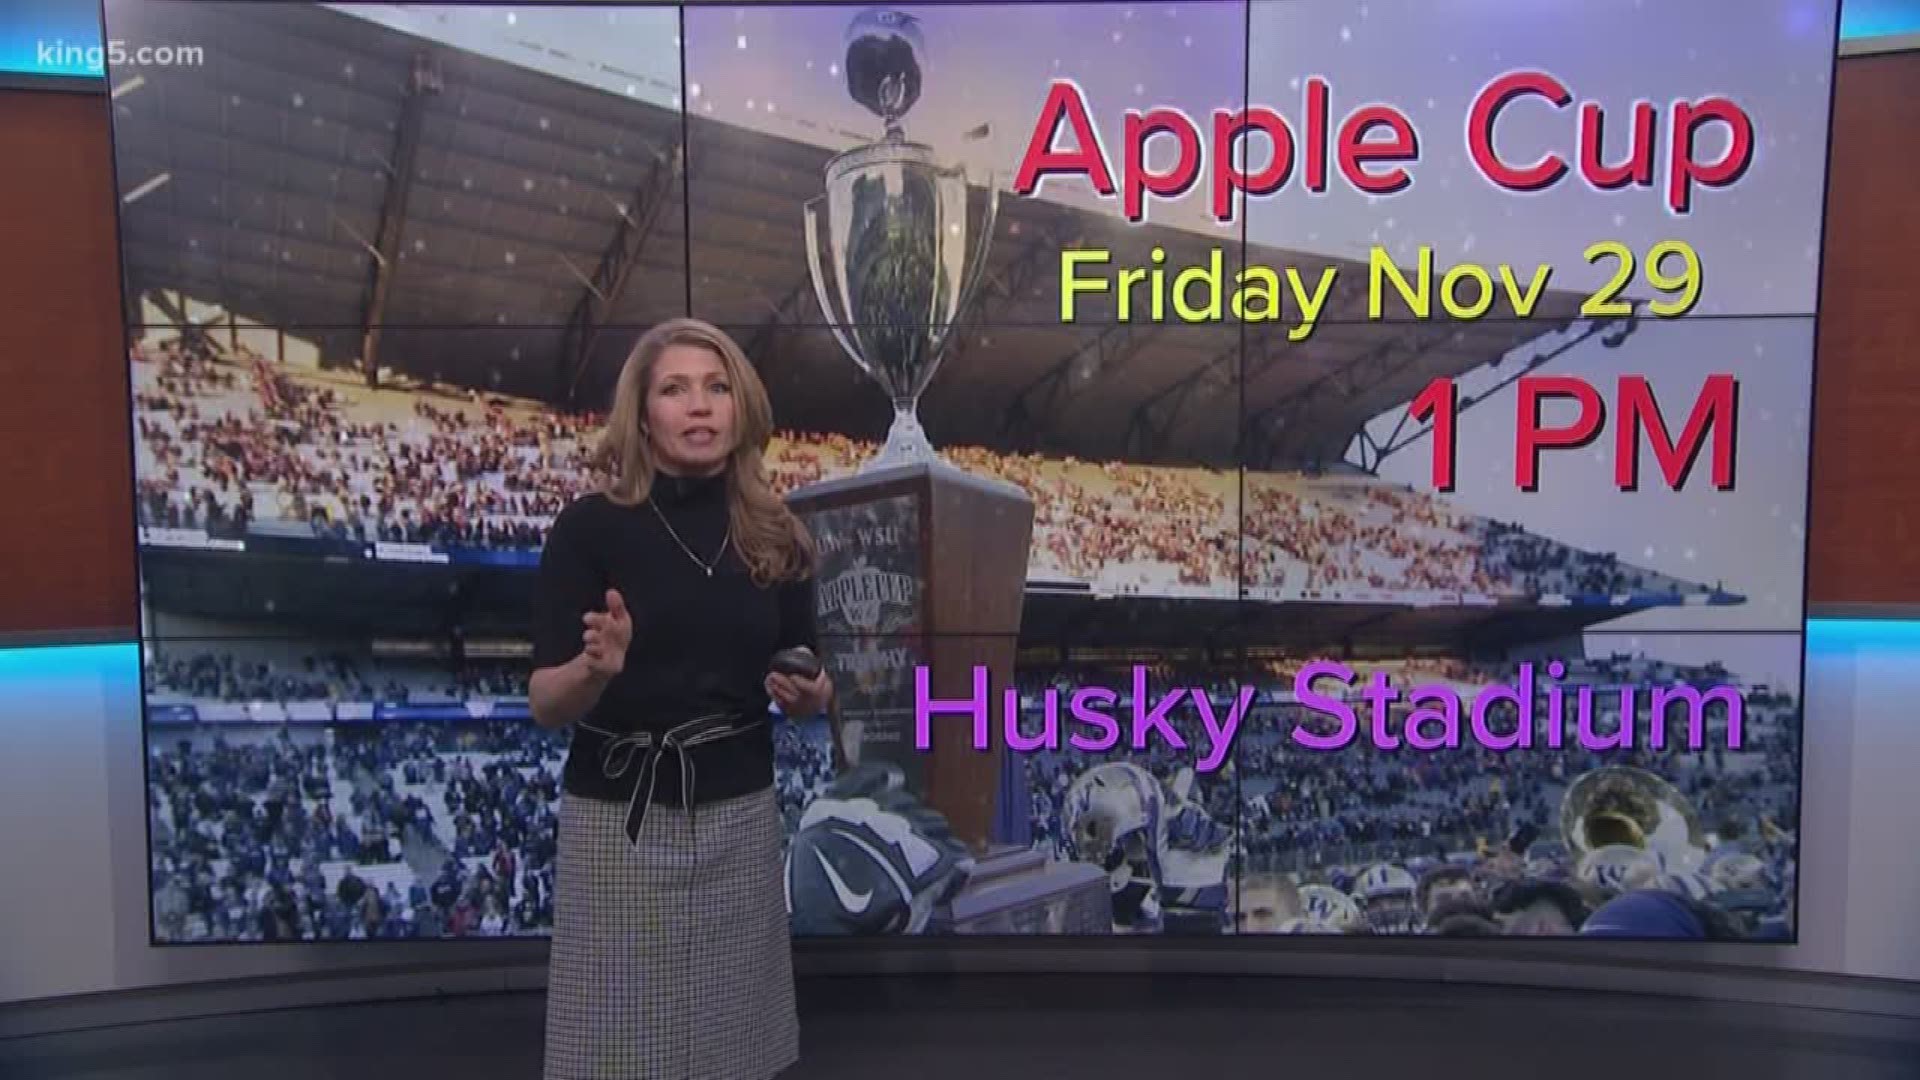 It's Apple Cup weekend, and fans will be flocking to Seattle to watch the Cougs take on the Huskies.